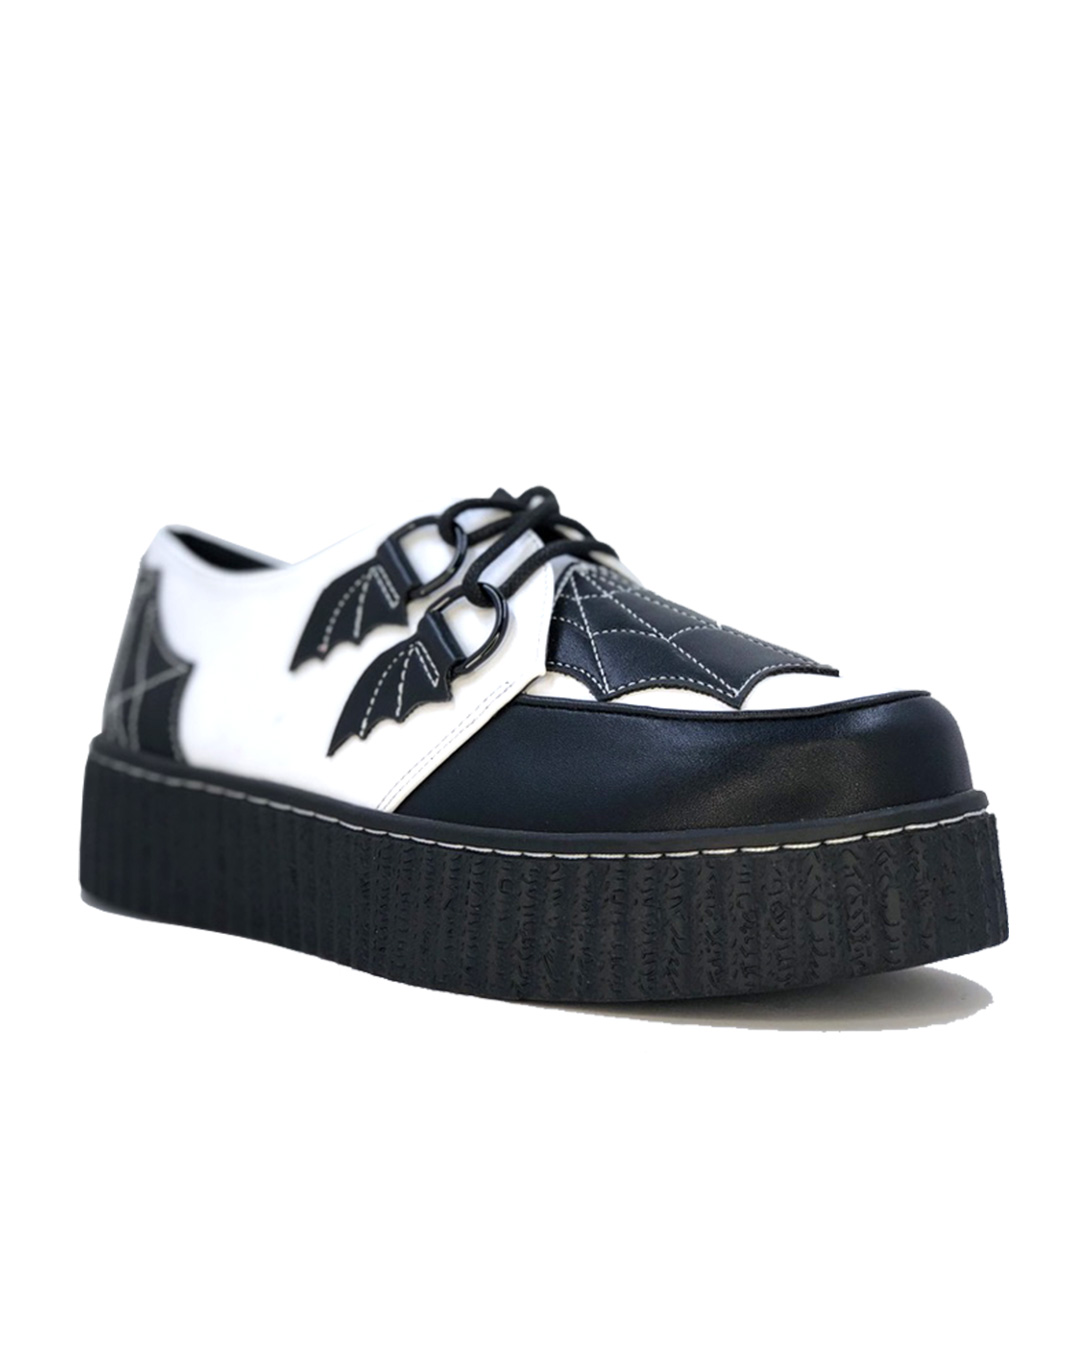 Spiderweb Black And White Creepers Shoes buy 